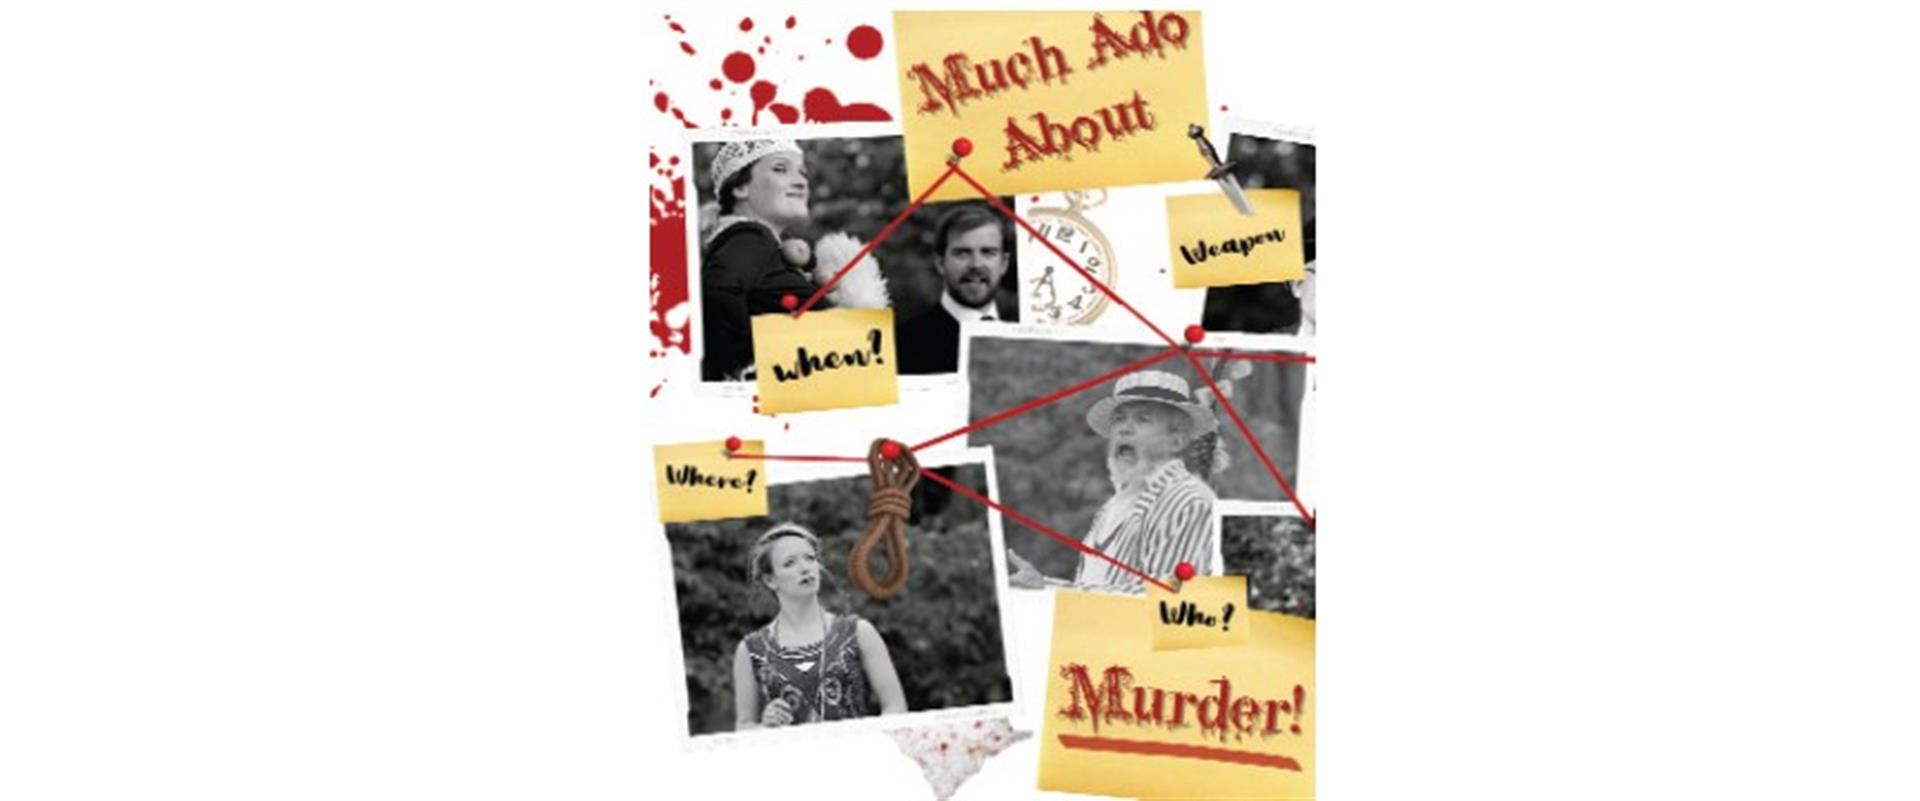  Much Ado About Murder by Peter Mimmack